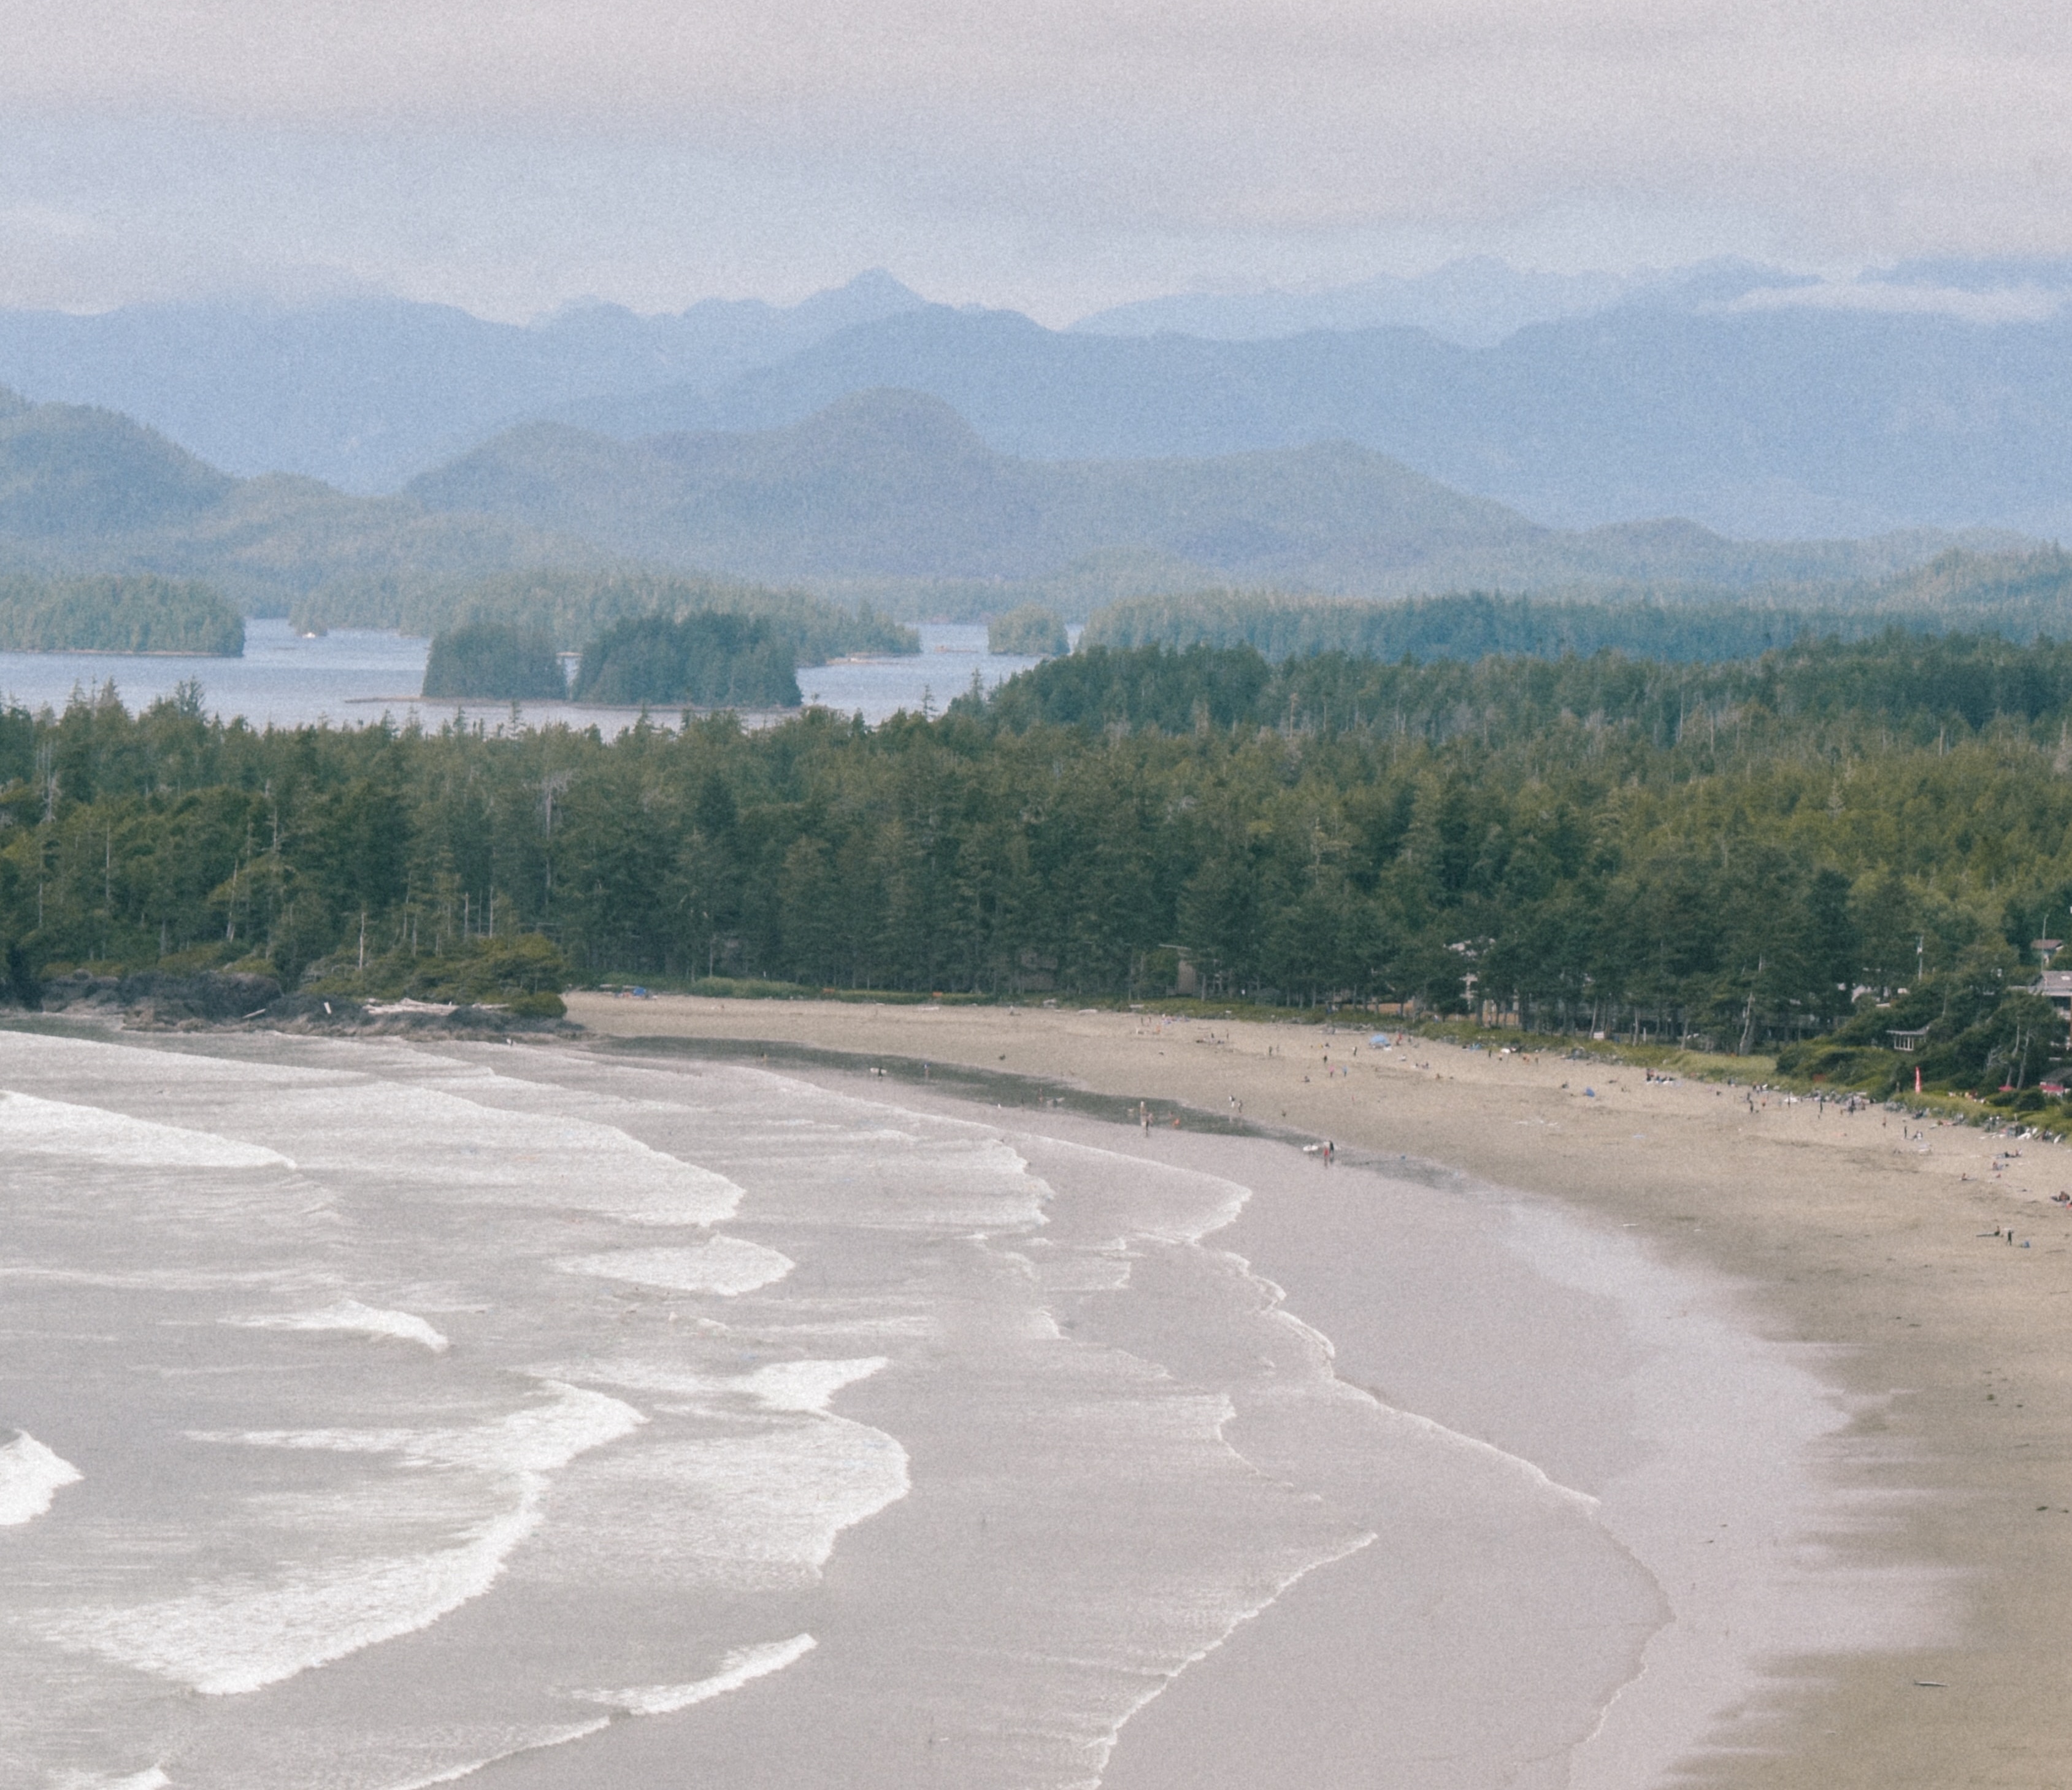 A bird's-eye-view of Chesterman beach and the pine trees and mountains surrounding it in Tofino, British Columbia.